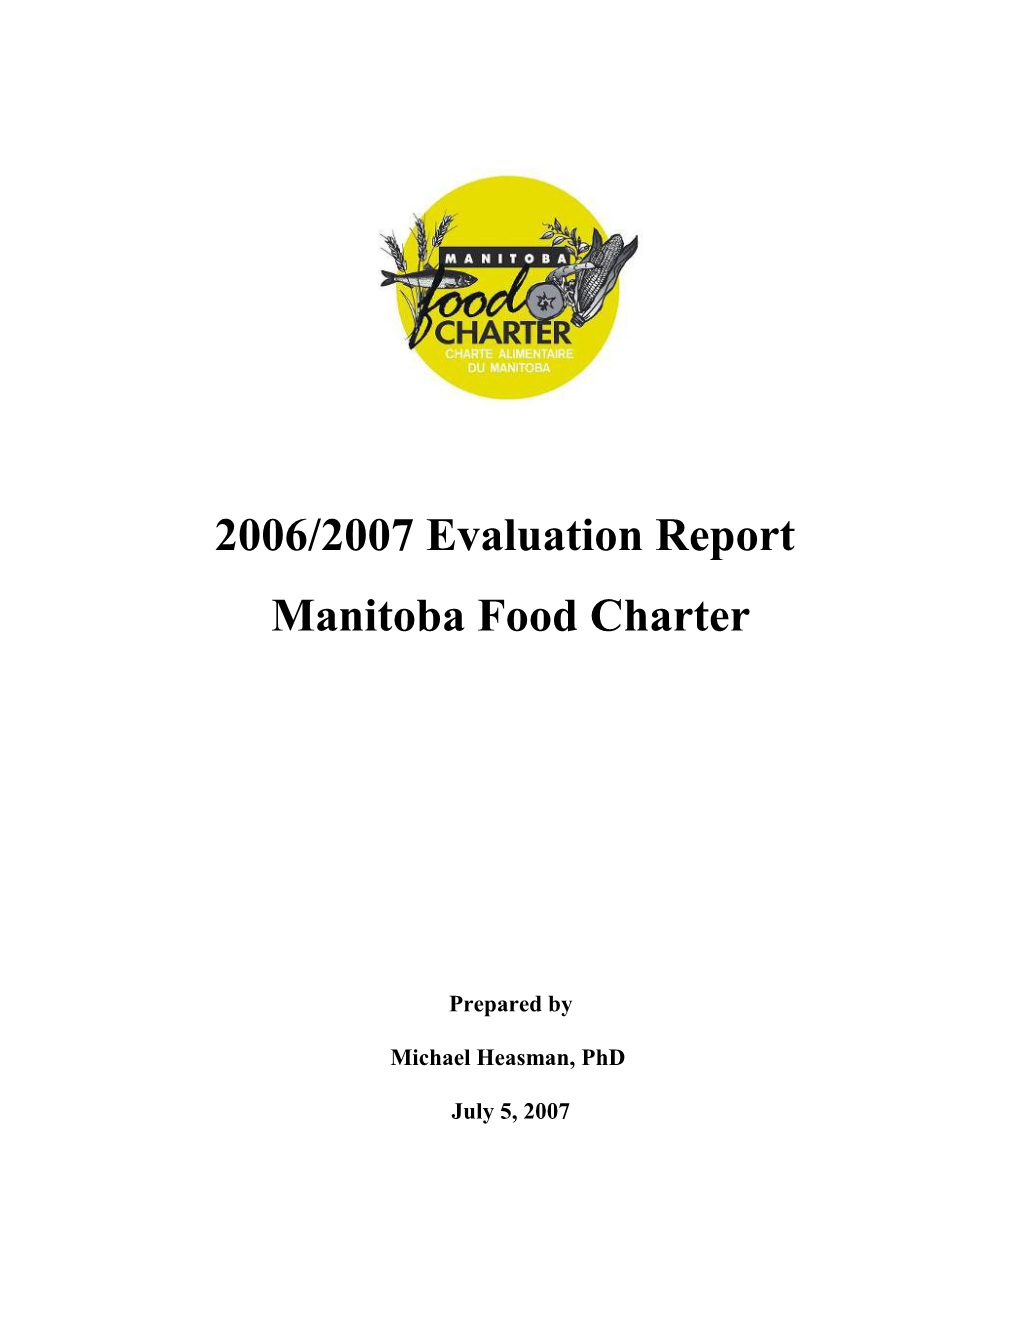 Manitoba Food Charter Is